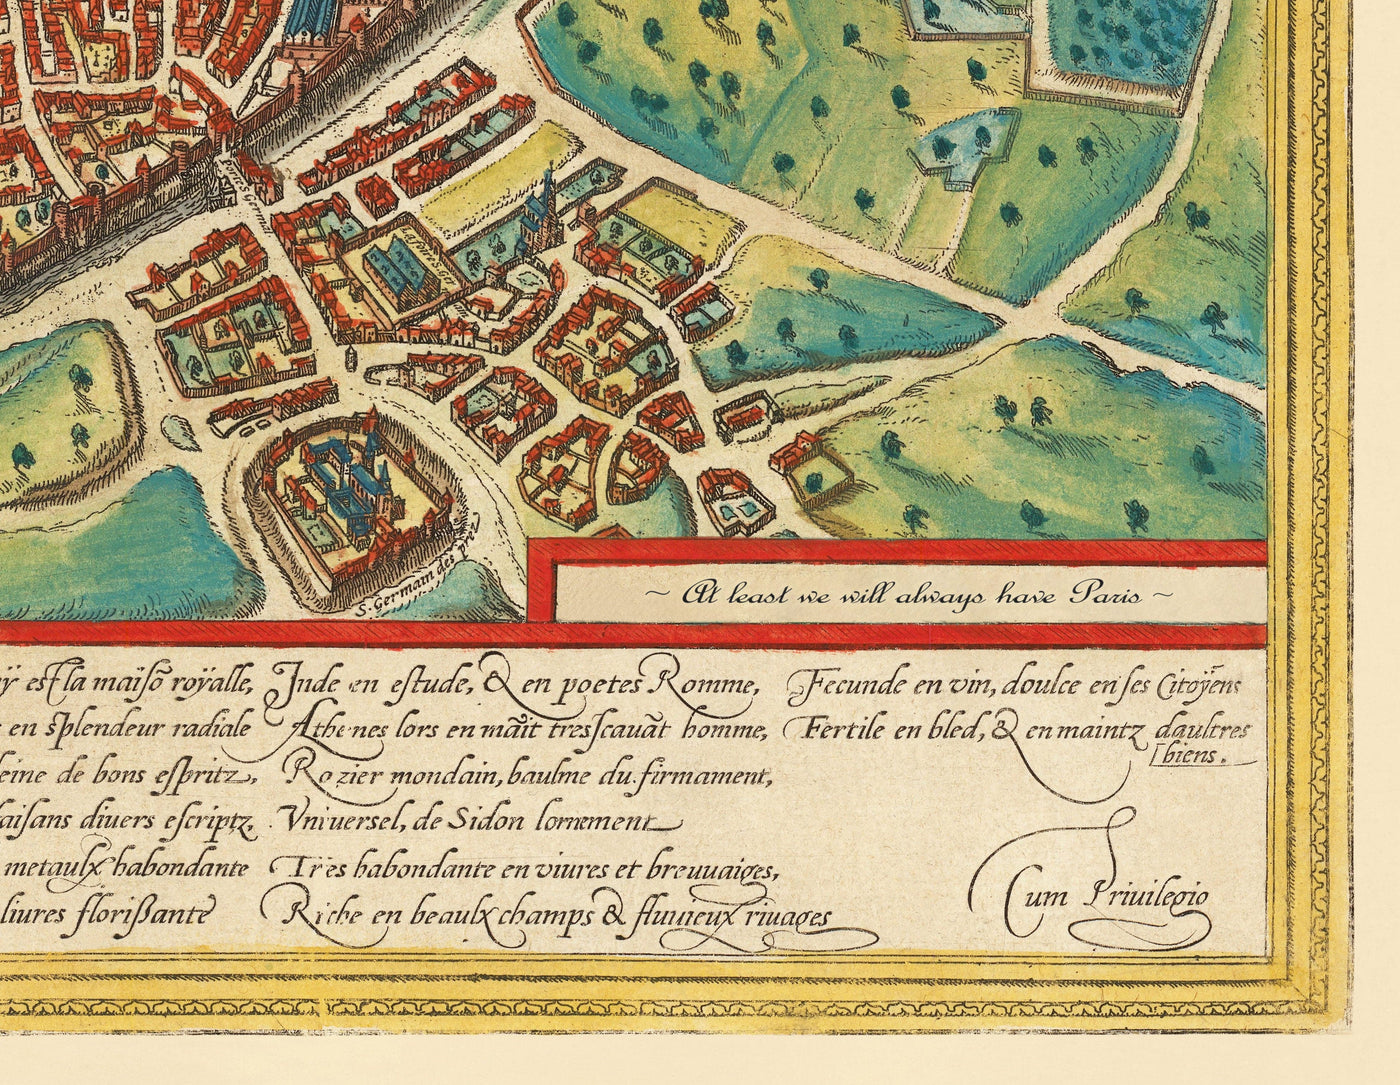 Old Map of Rome, 1572 by Braun - Vatican City, Papal Palace, Forum, Pantheon, Ancient Ruins, Colosseum